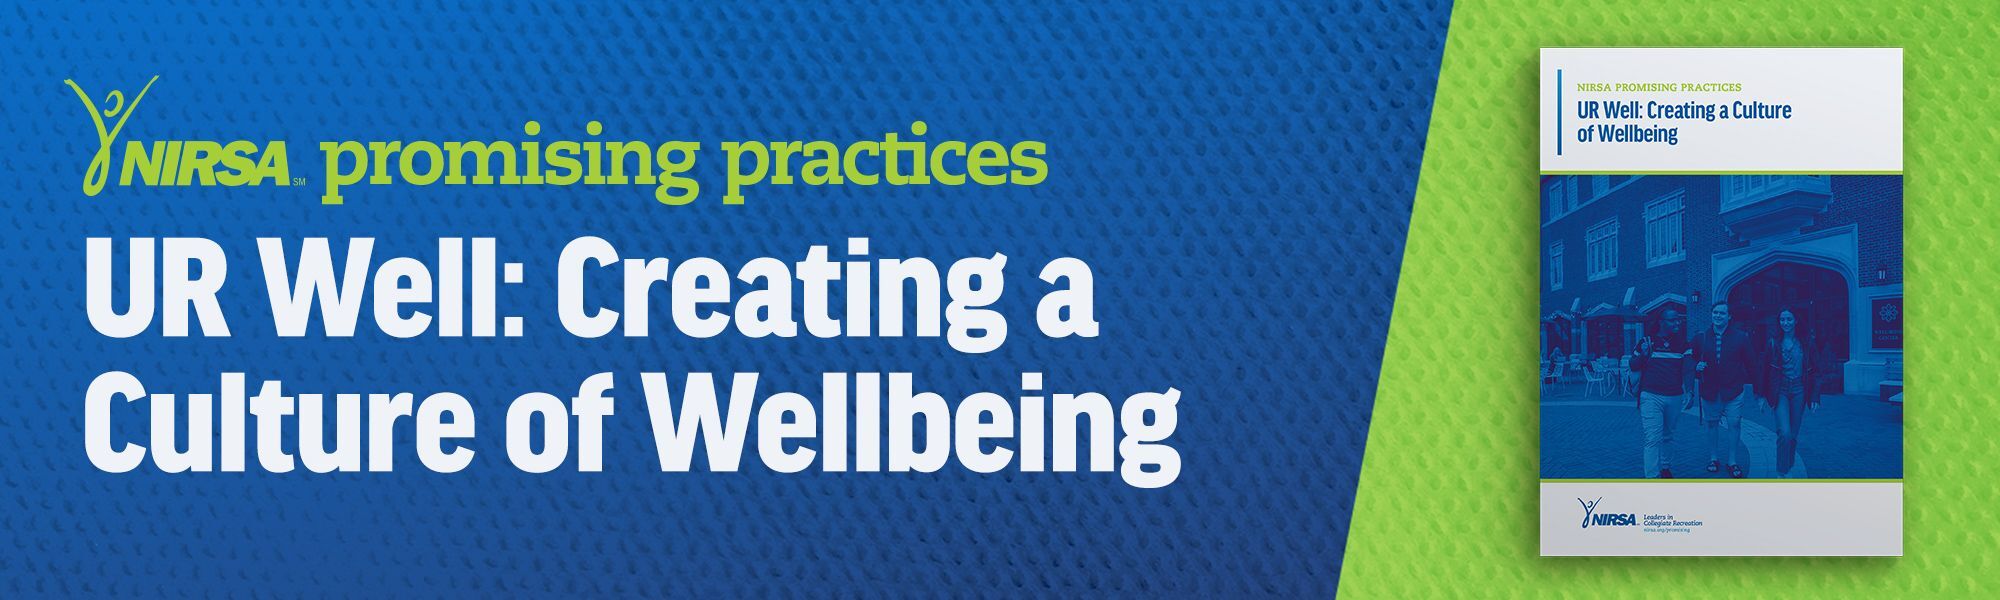 NIRSA Promising Practices: UR Well "Creating a Culture of Wellbeing" PDF